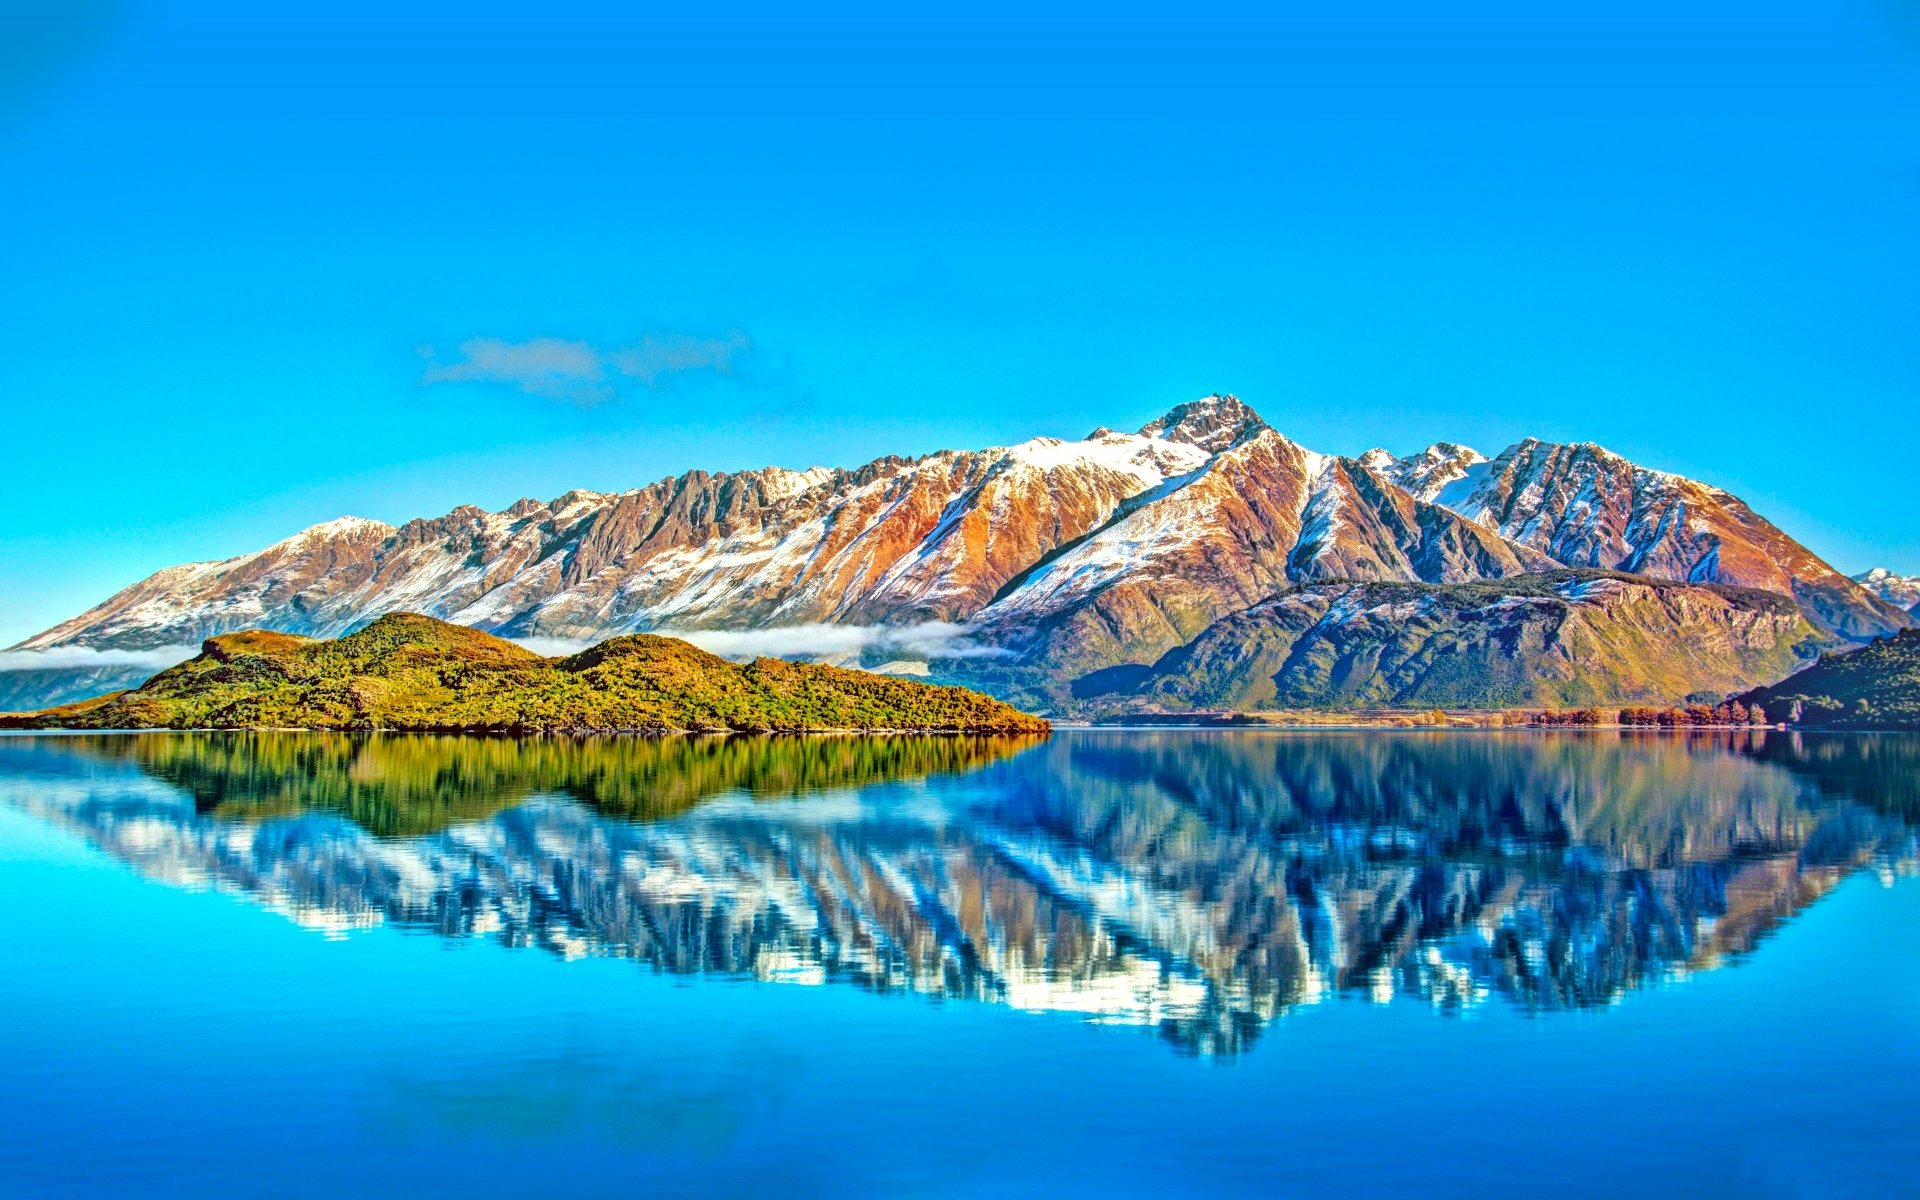 HD wallpaper featuring a vivid reflection of snow-capped mountains and trees in Lake Wanaka, capturing the serene beauty of nature.